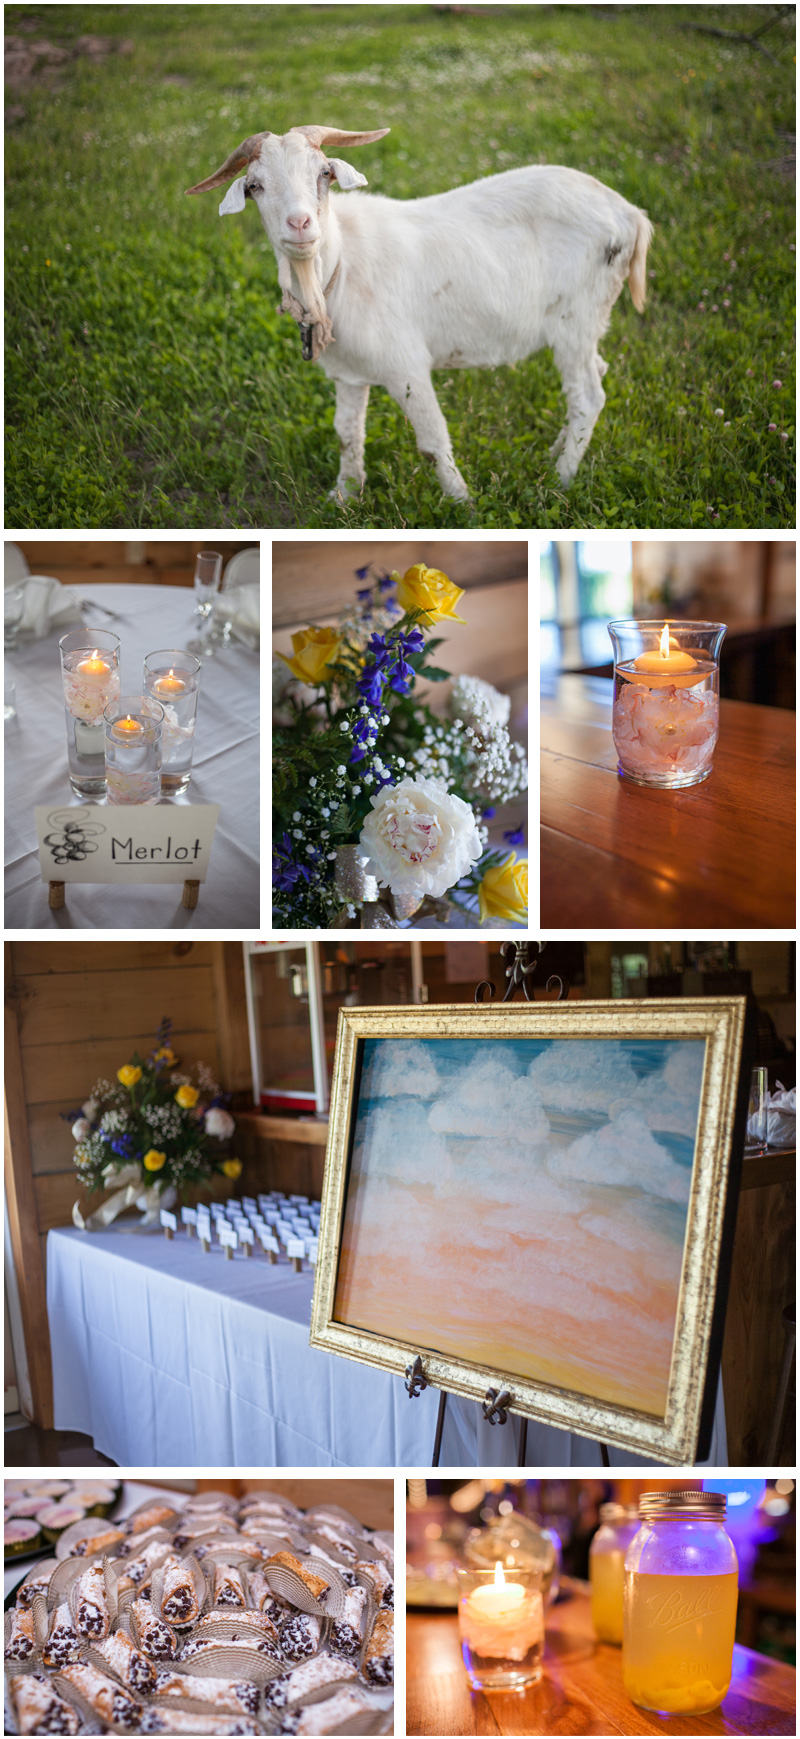 The bride and groom's reception details at their Upstate NY wedding candle votives, a hand painted guesbook, and gorgeous flowers